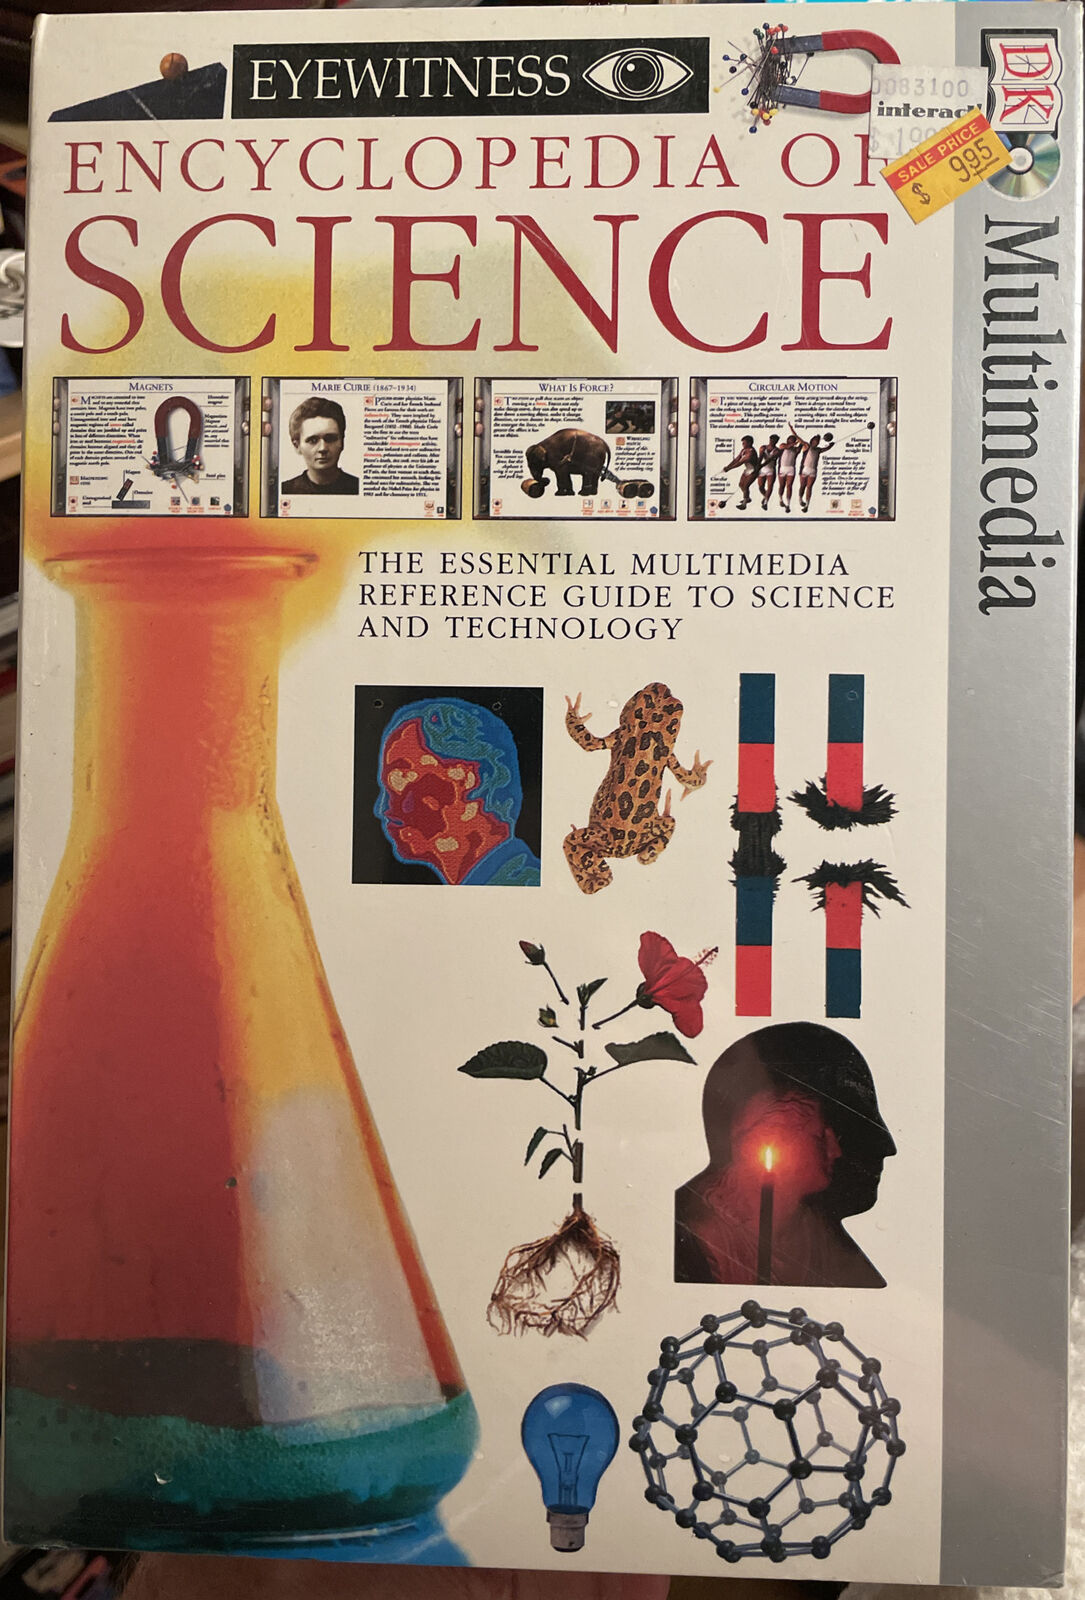 Eyewitness Encyclopedia of Science PC 1994 (CD-ROM for Windows) BRAND NEW SEALED